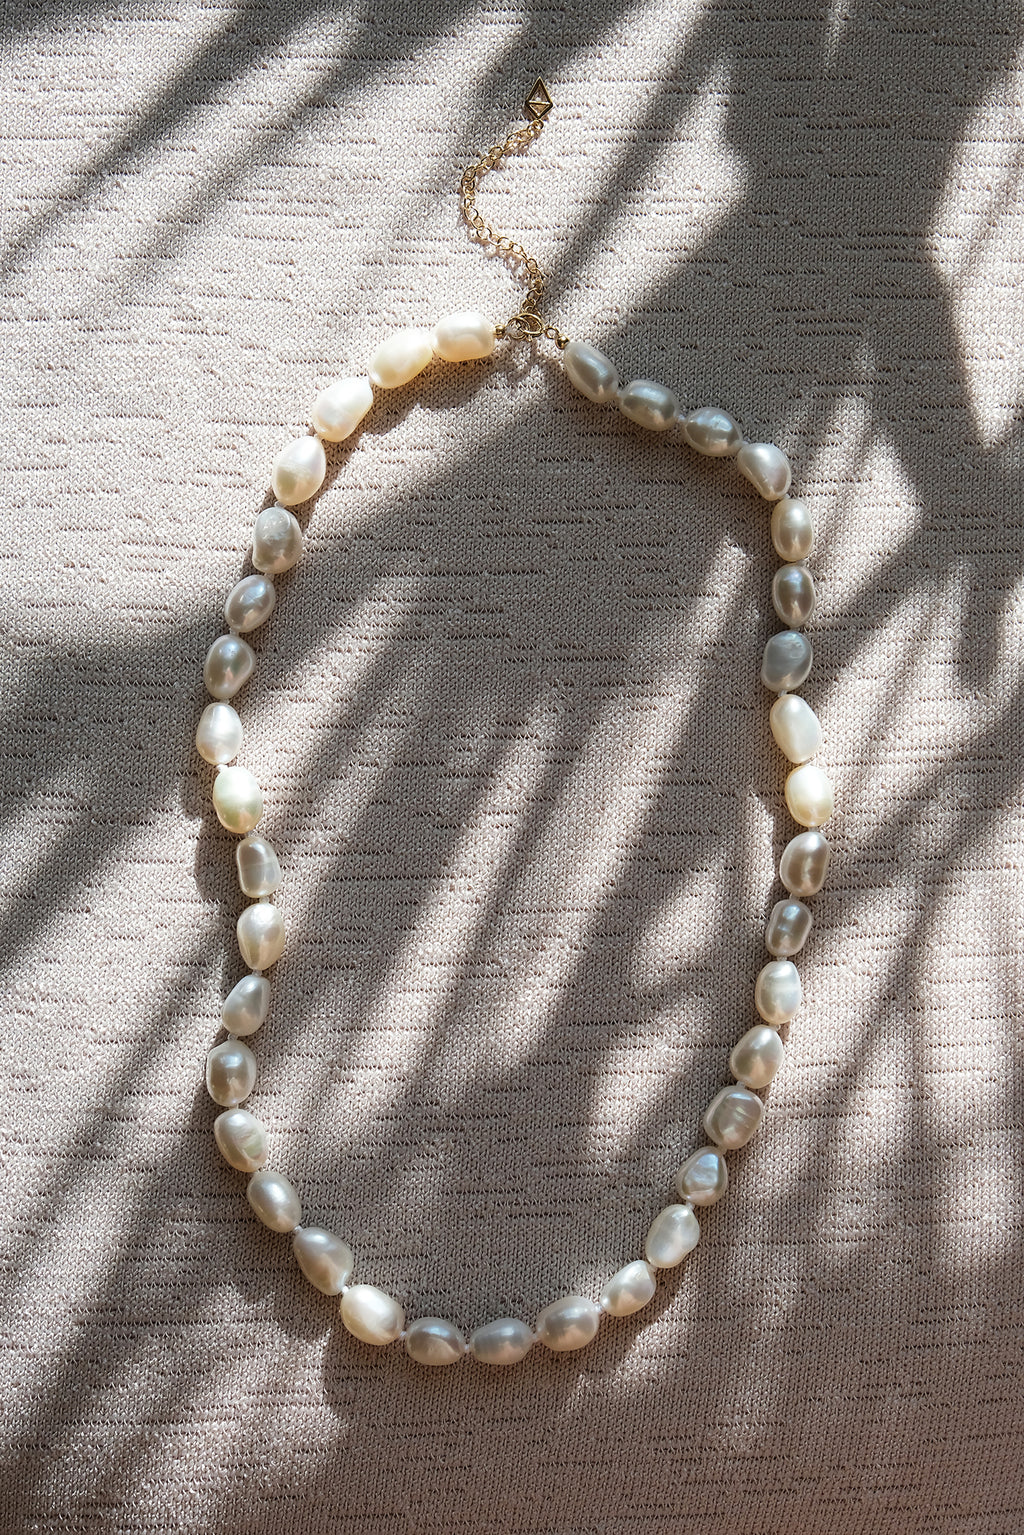 Oval baroque pearl necklace // Golden